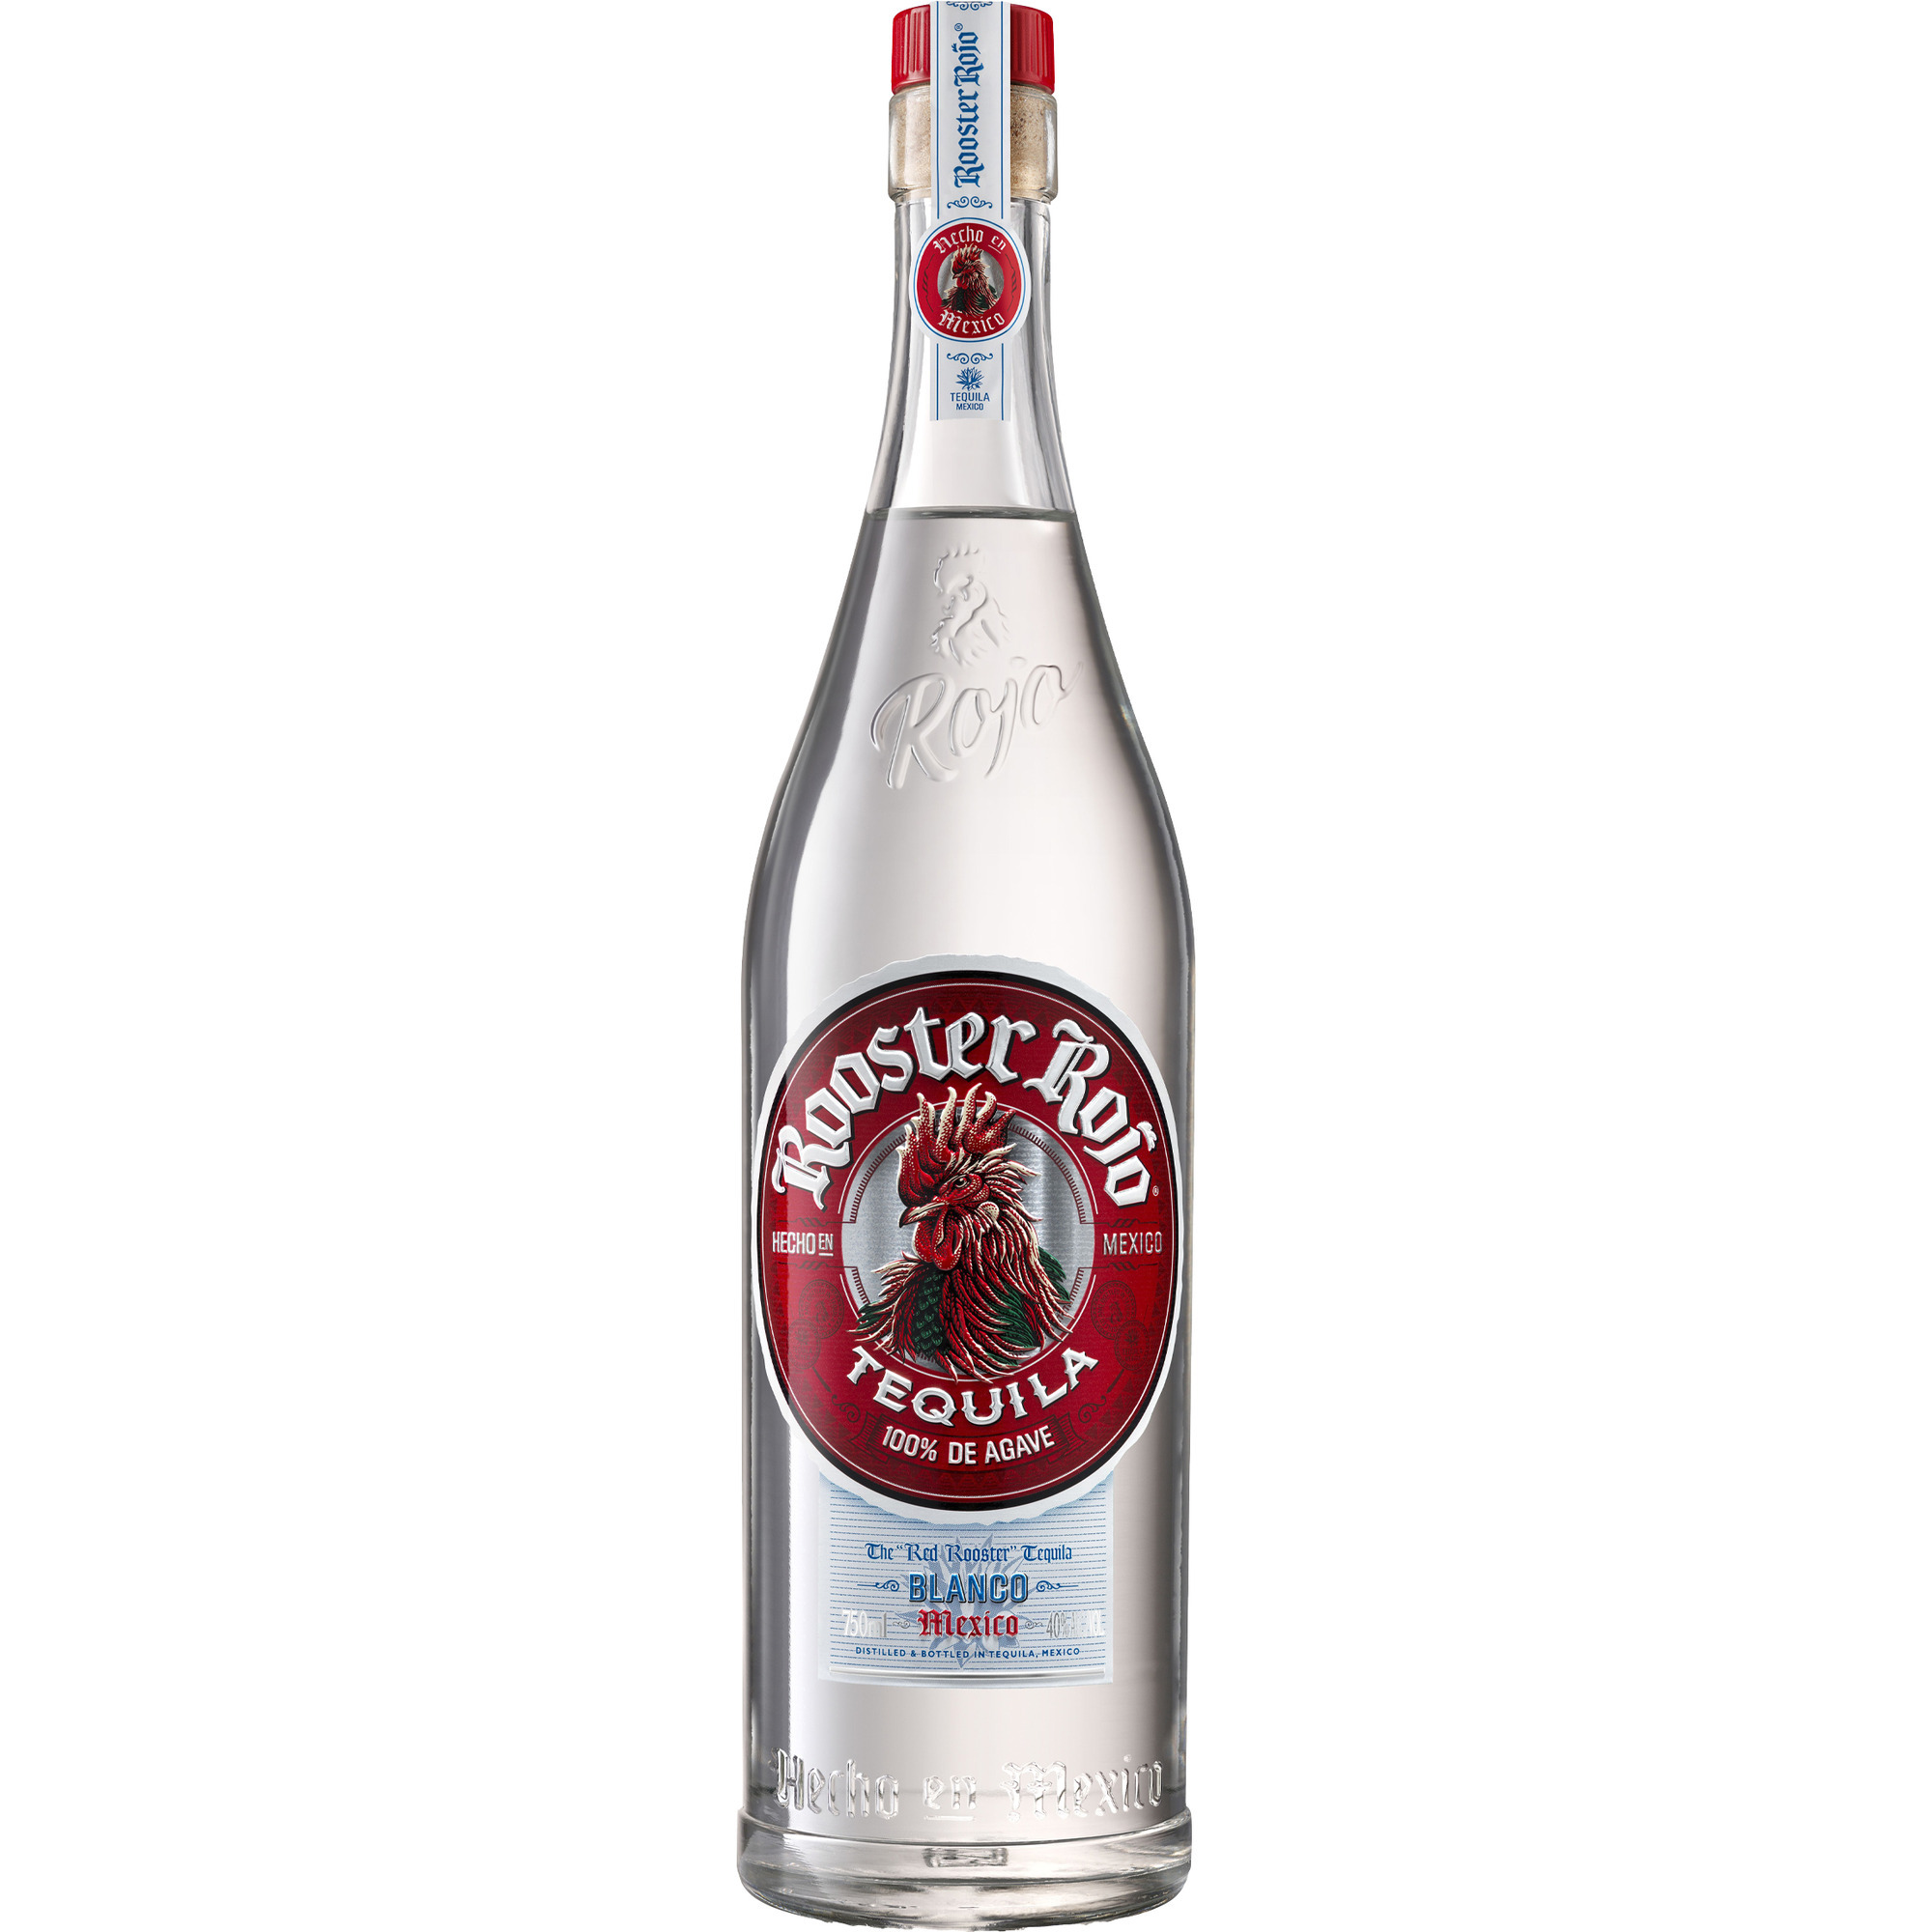 Rooster Rojo Tequila 0,7l, Blanco